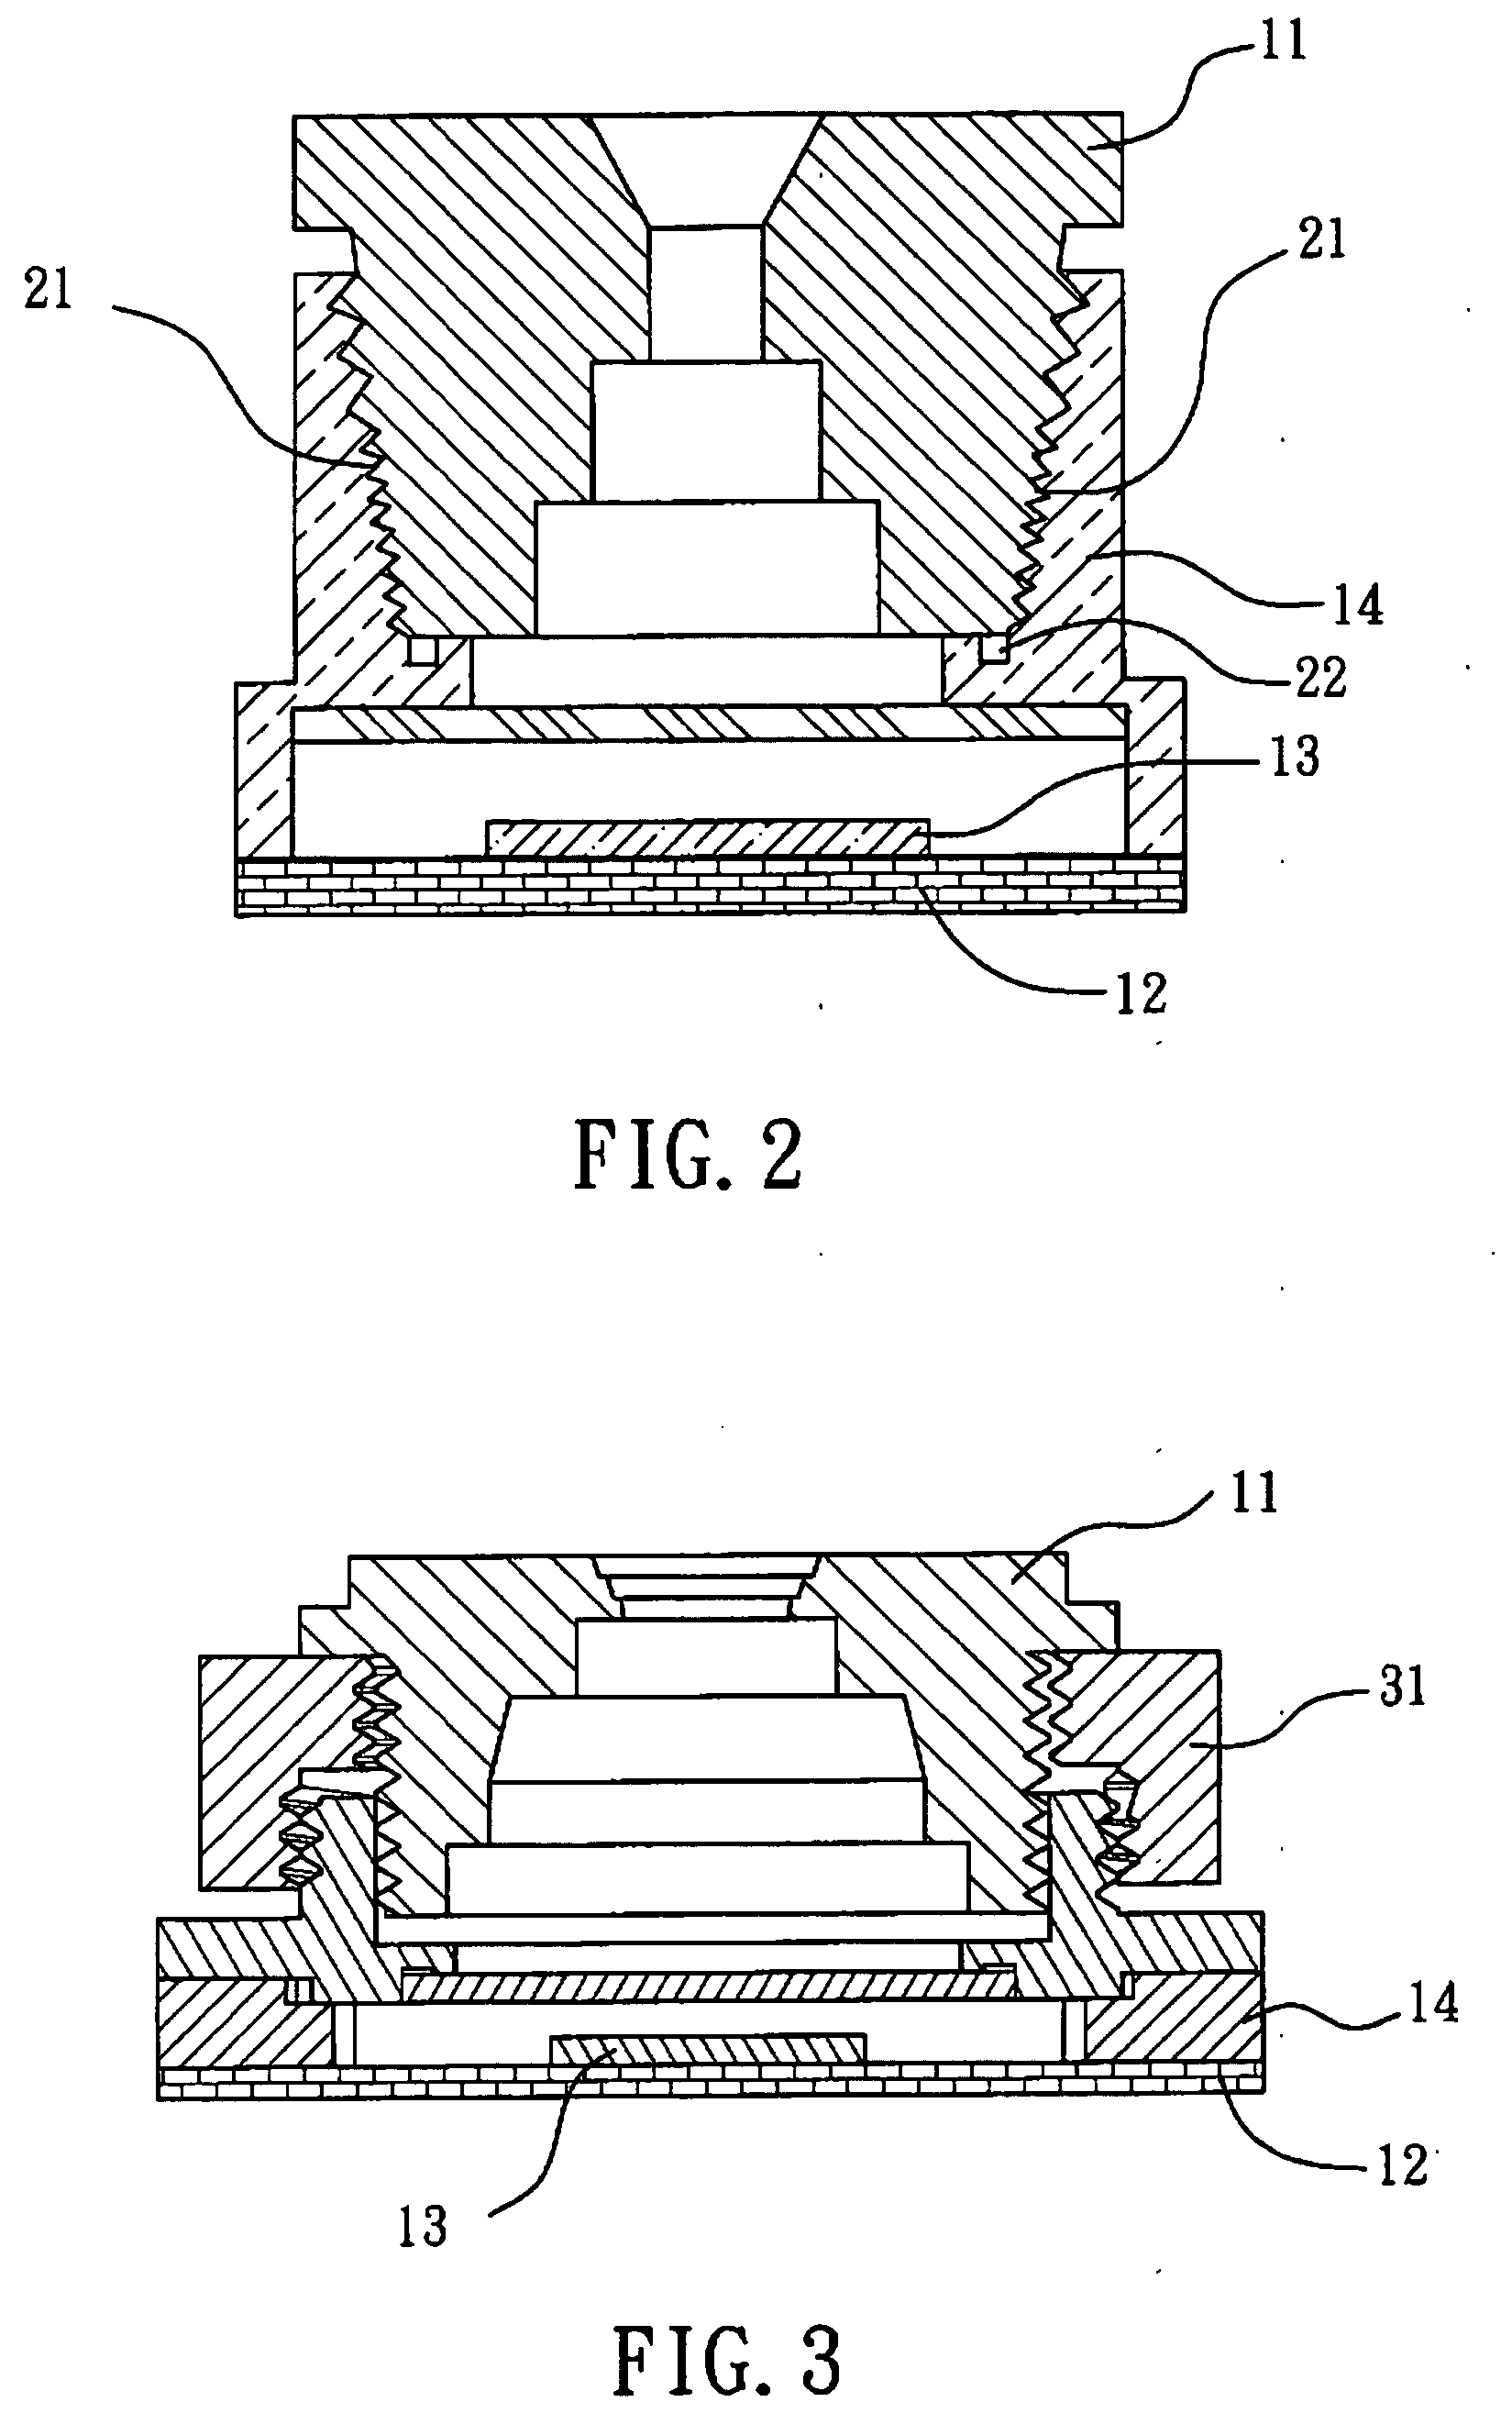 Electrical micro-optic module with improved joint structures